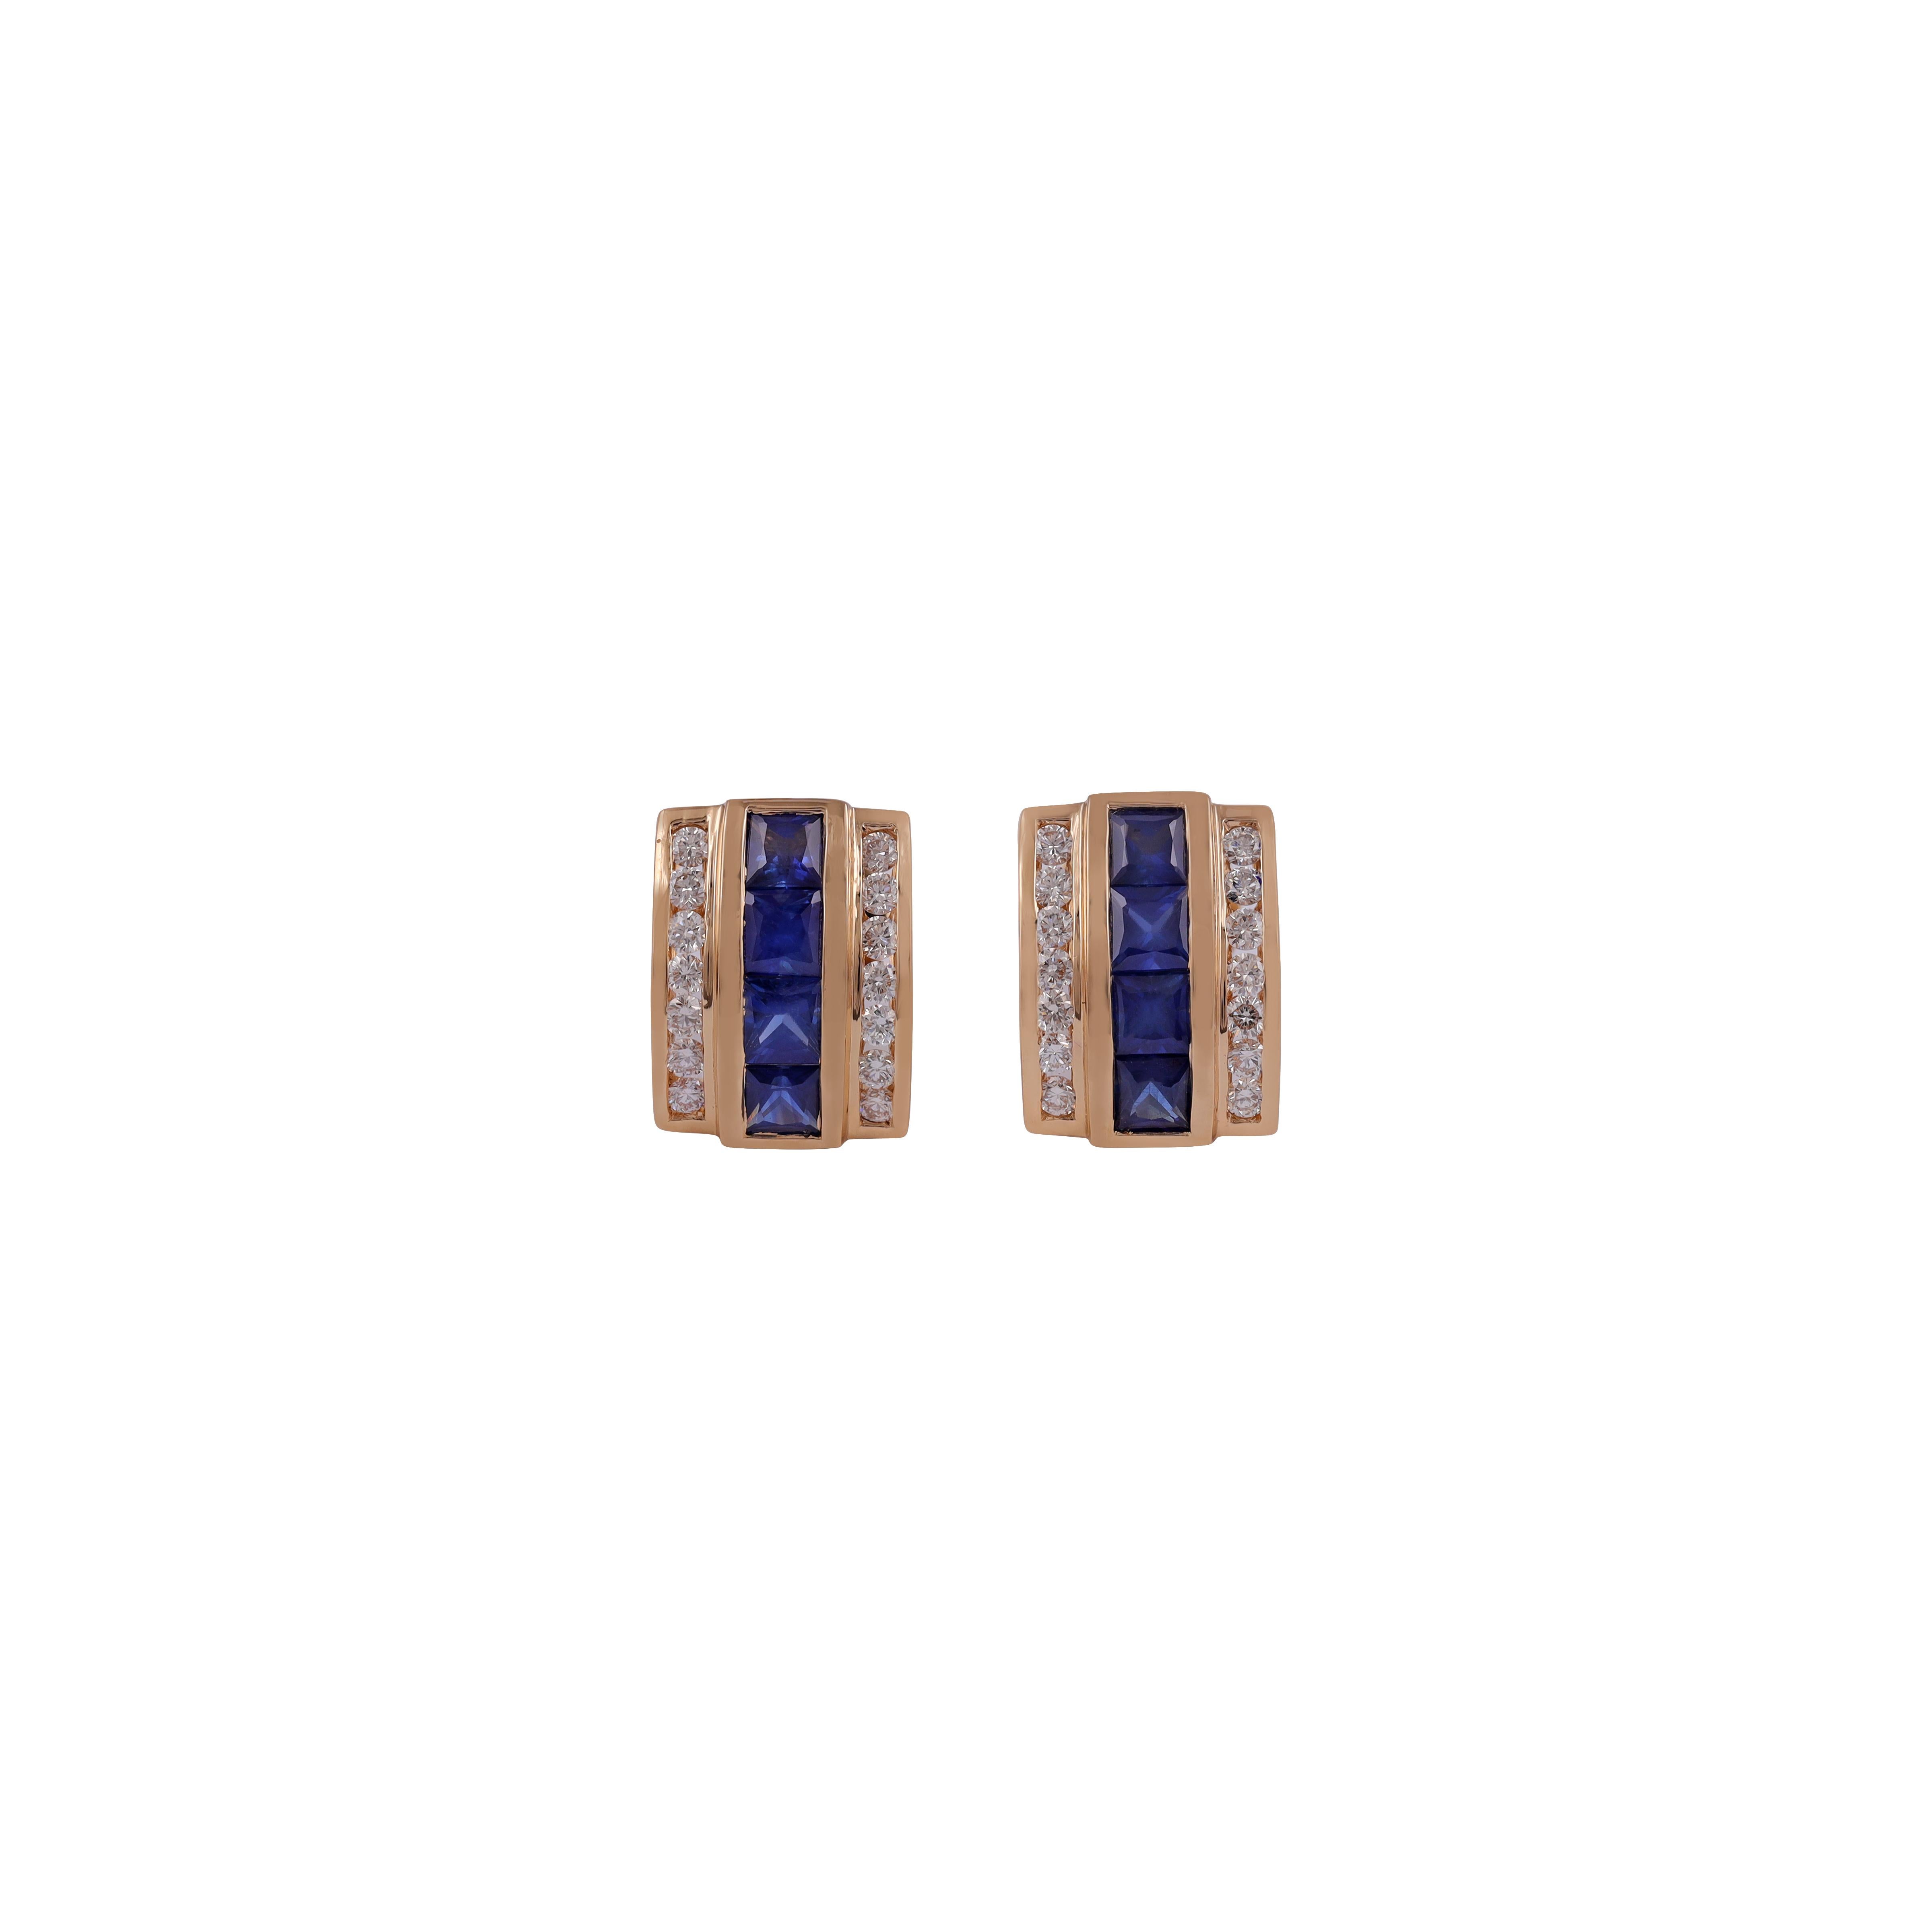 This is an elegant Stud earring pair with Sapphire & diamonds feature 8 pieces  Sapphire weight 1.42 carats, 28 pieces of  diamonds weight 0.42 carat , these earrings entirely made in 18K Yellow gold weight 4.38 grams.